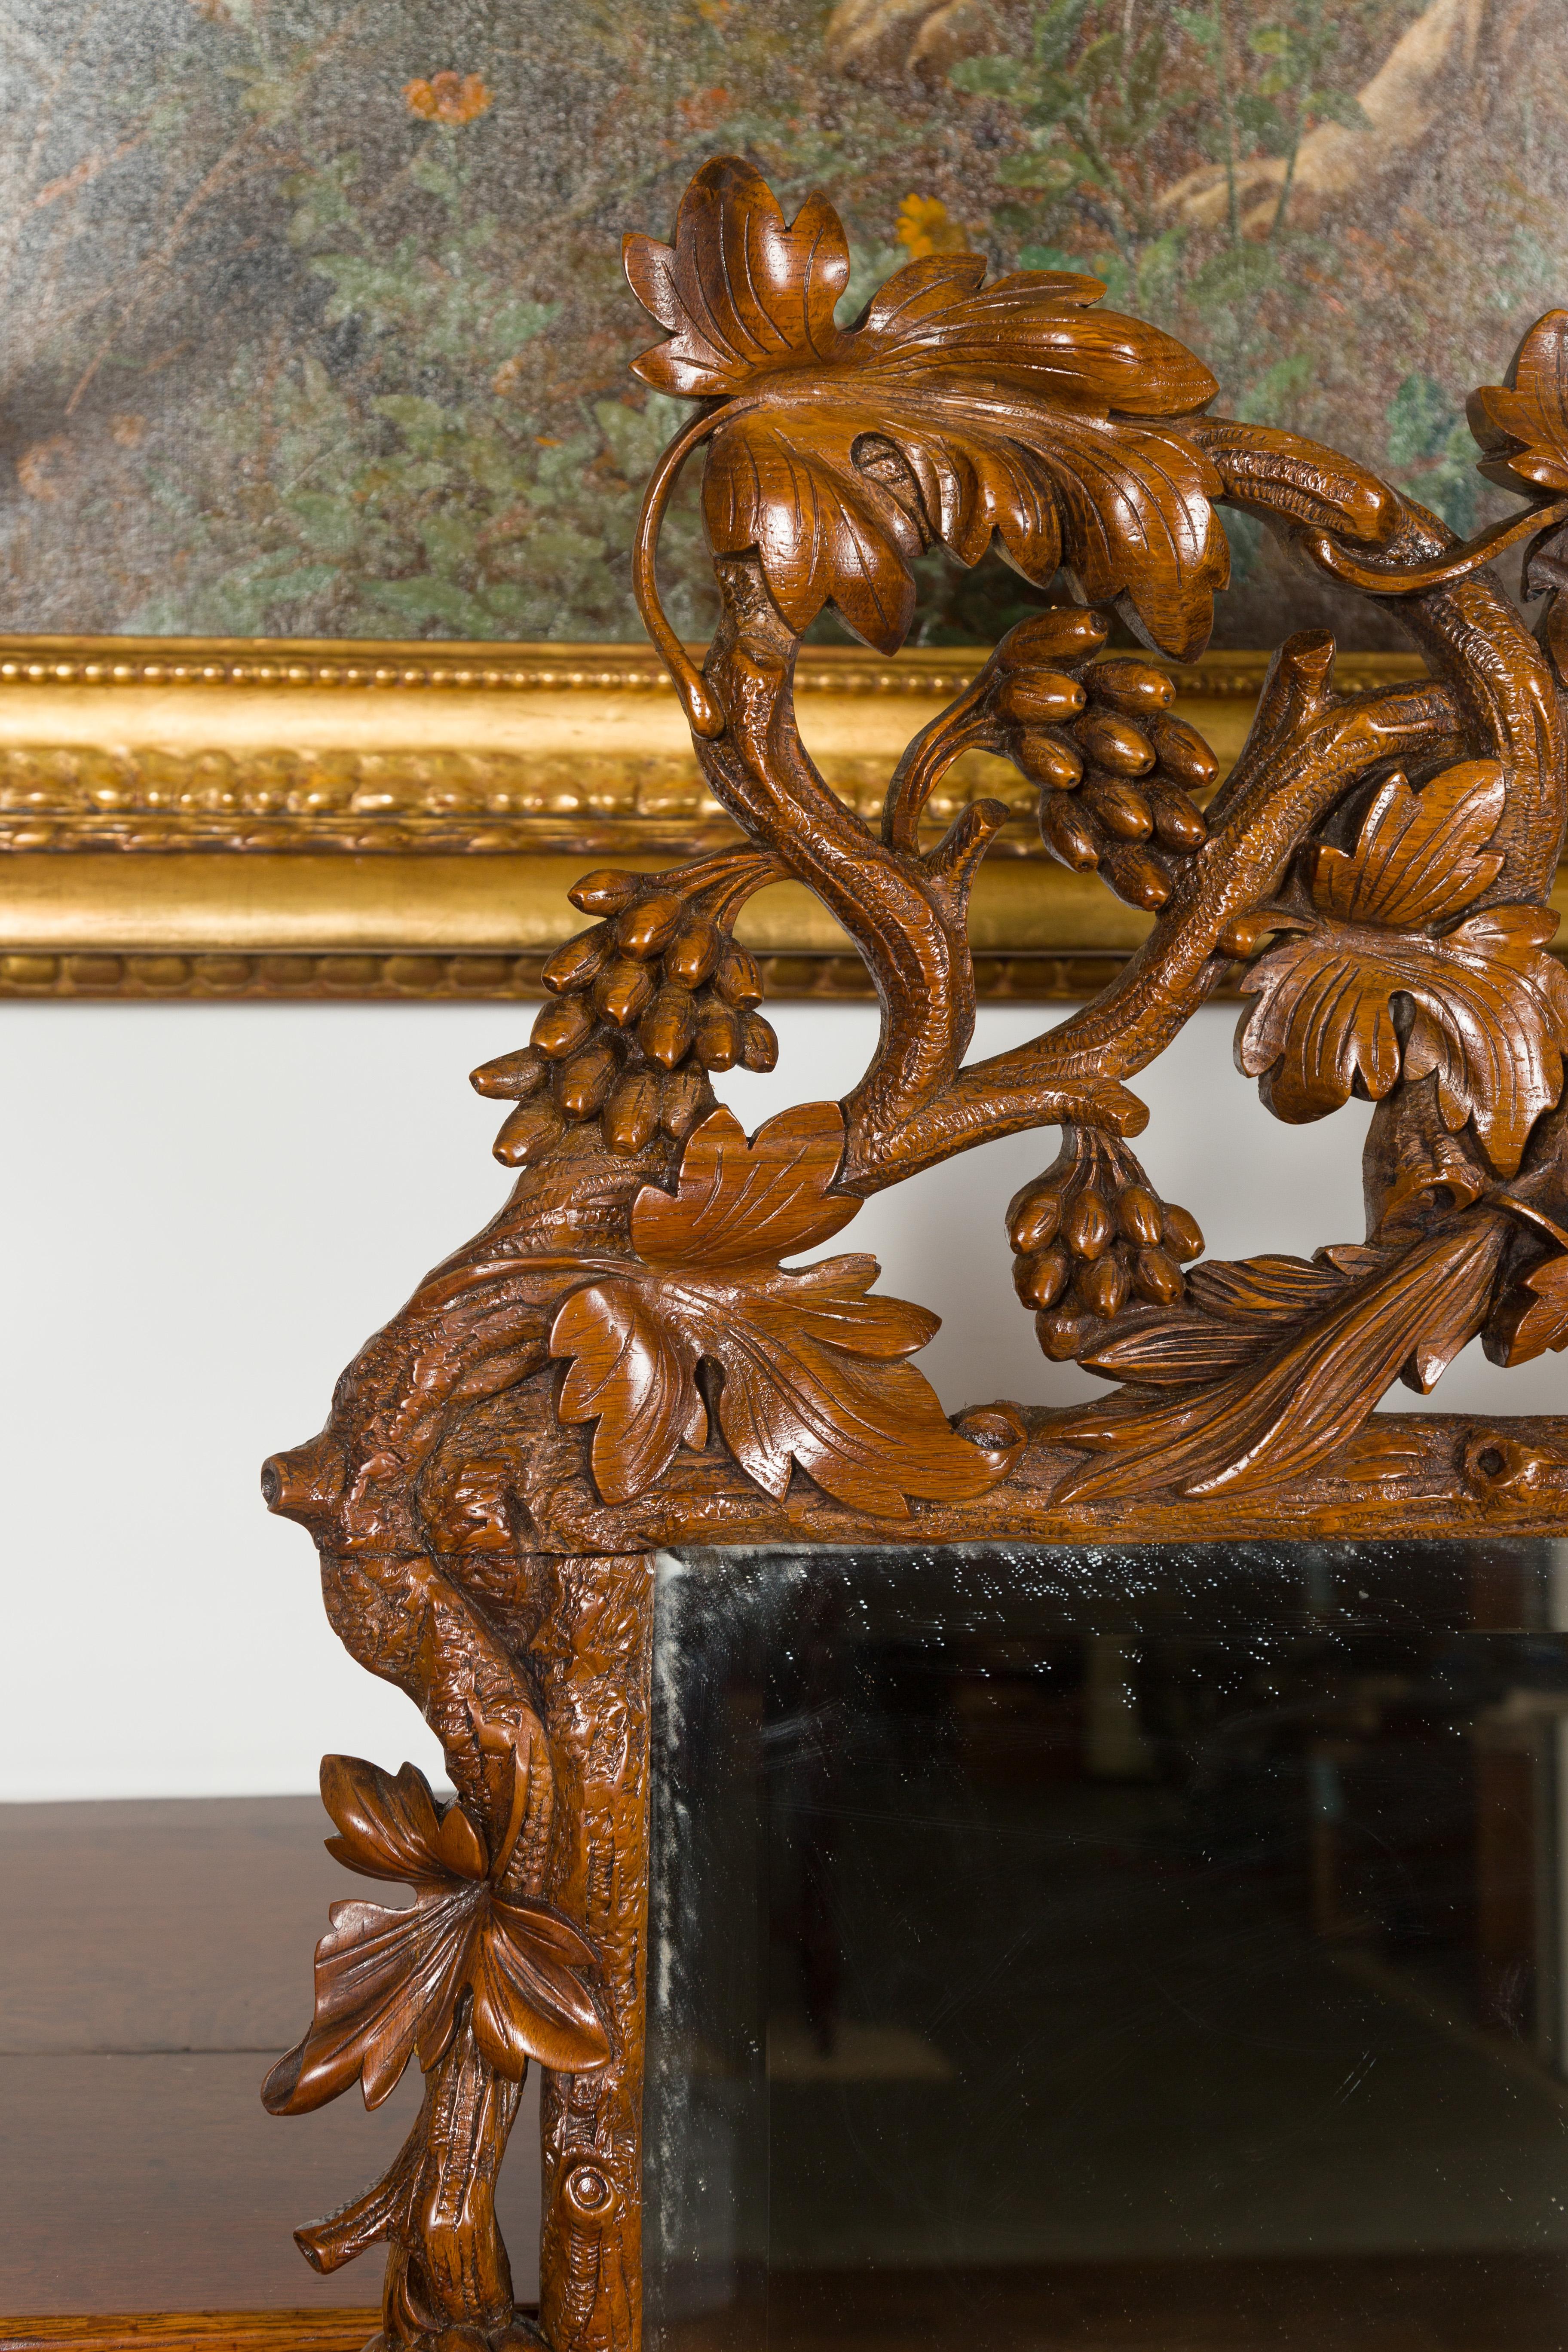 20th Century Black Forest Period 1900s Wooden Mirror with Carved Dog, Foliage and Fruits